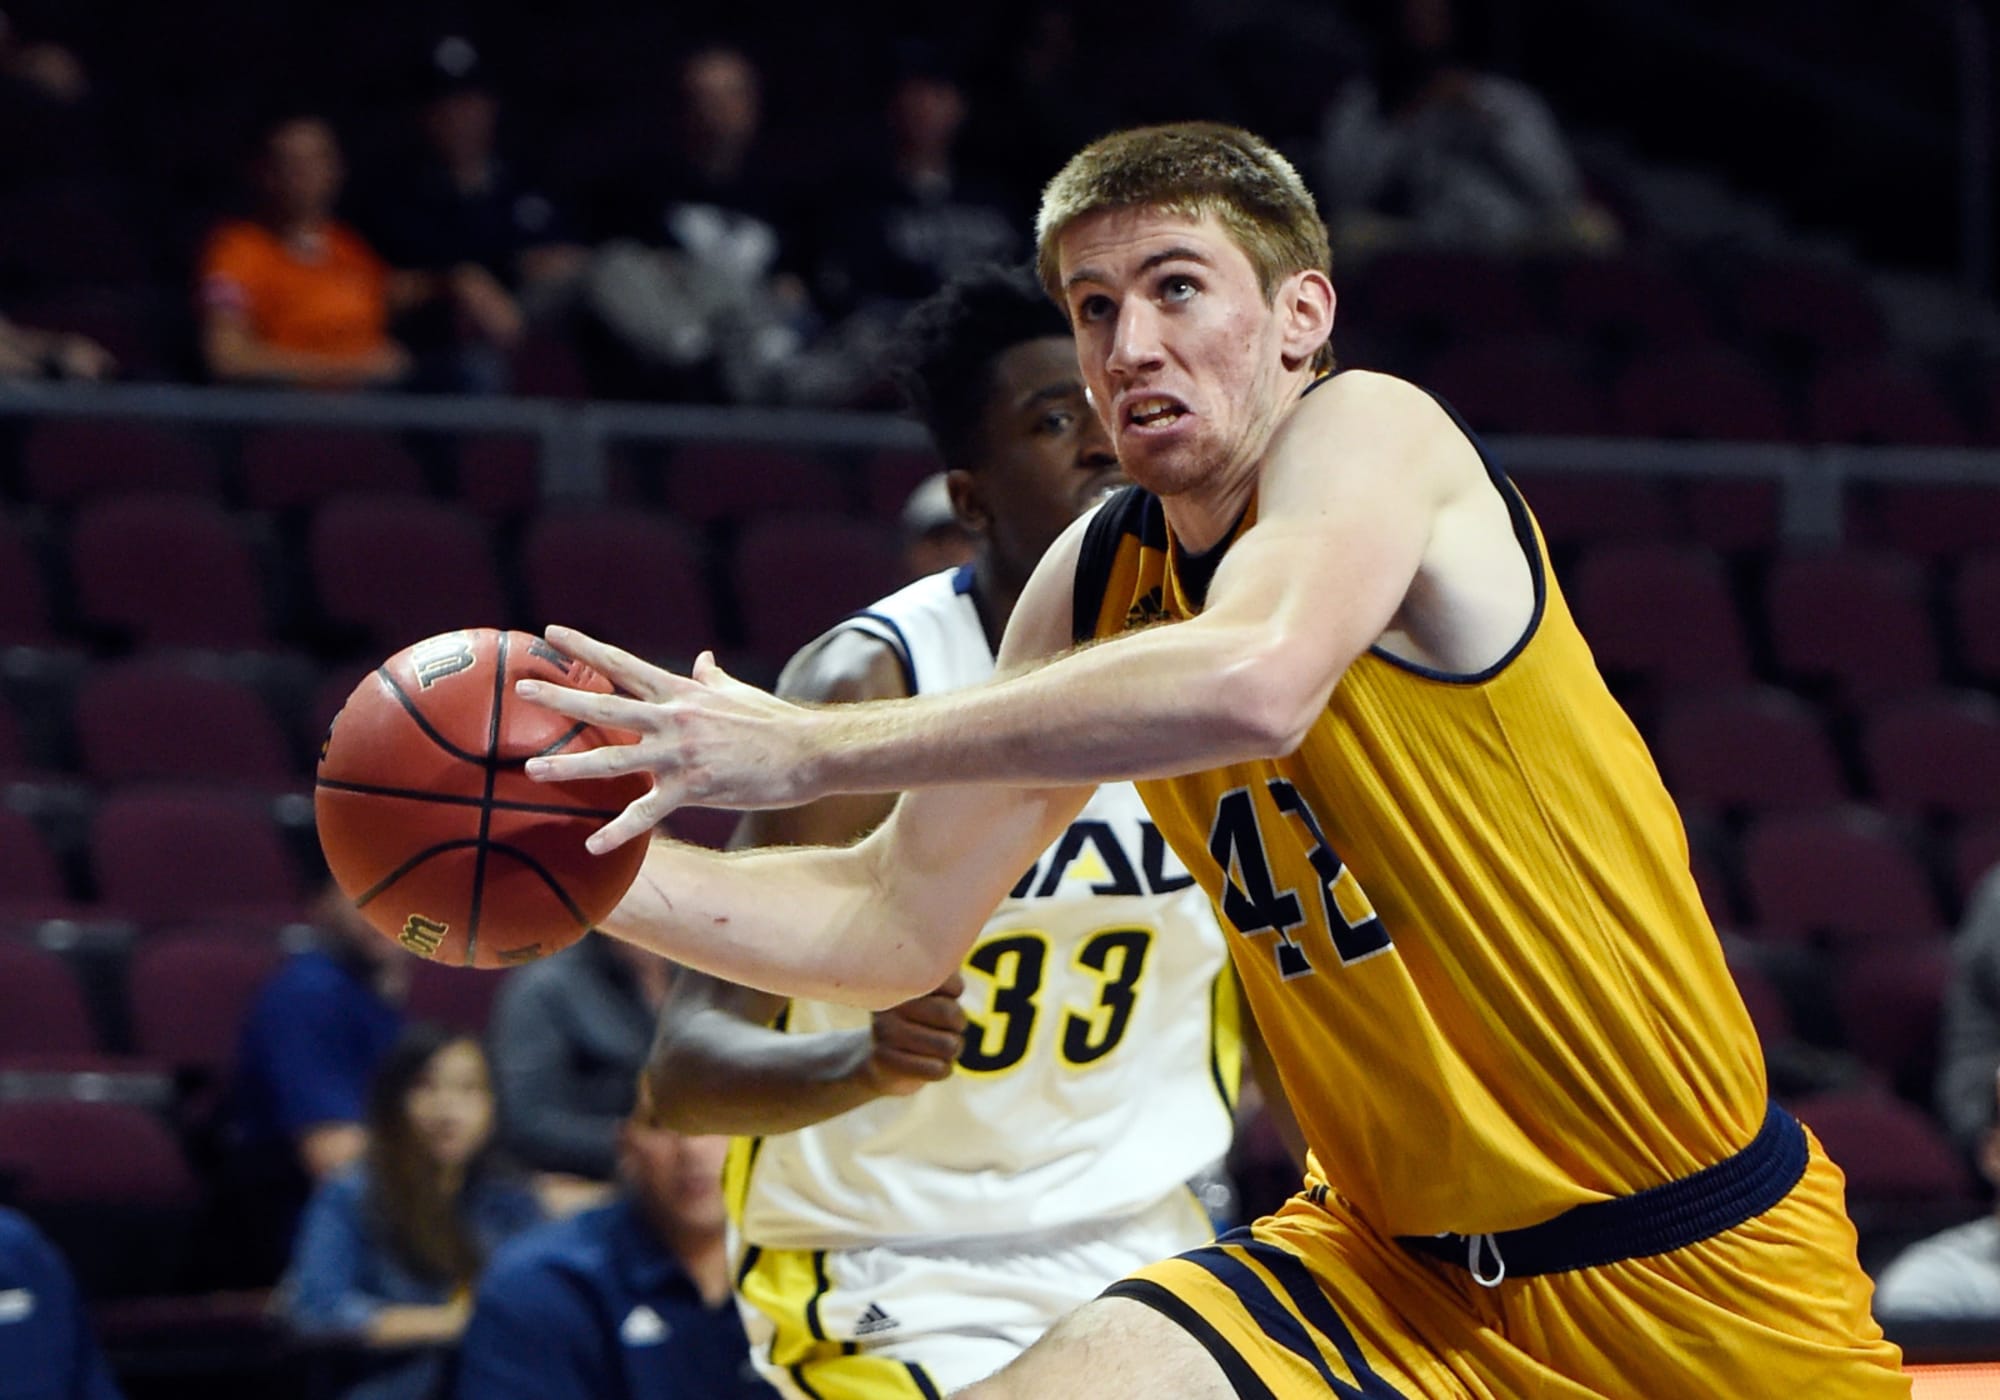 UC Irvine Basketball Can Anteaters take advantage of no Dean Wade?